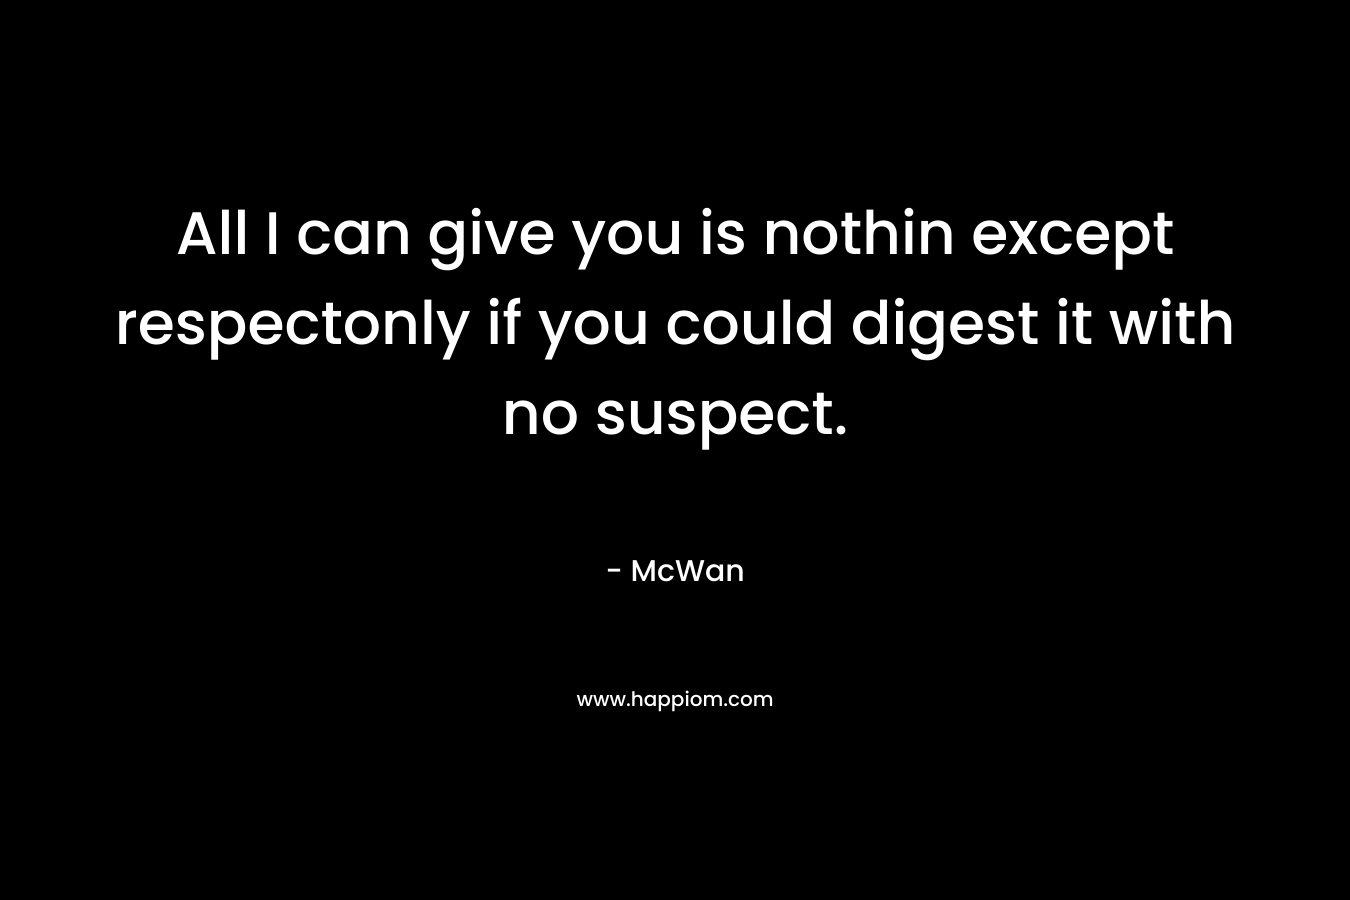 All I can give you is nothin except respectonly if you could digest it with no suspect. – McWan